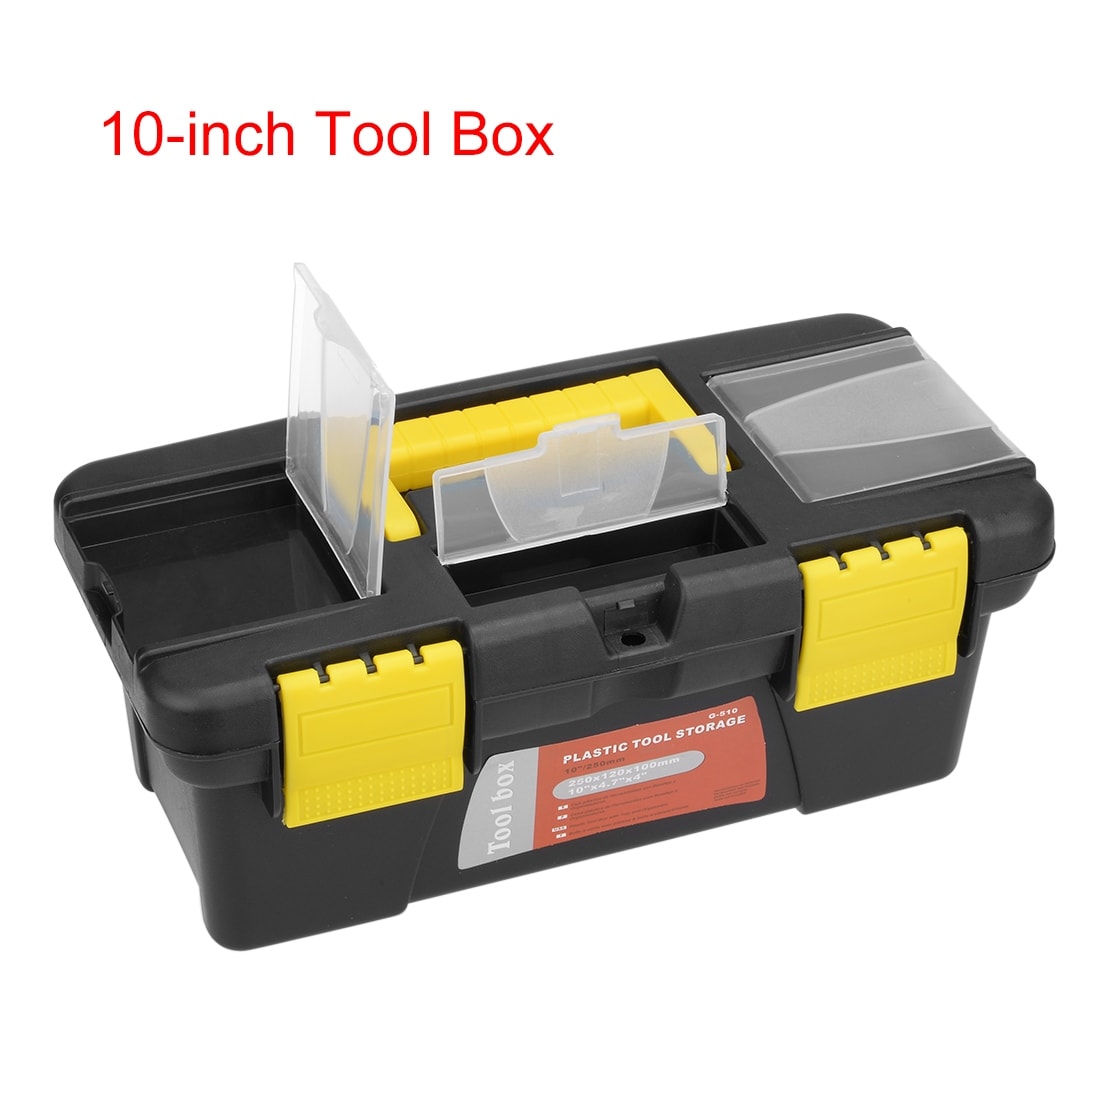 10-inch Tool Box with Tray and Organizers Includes Three Small Parts Boxes  - Bed Bath & Beyond - 27580308